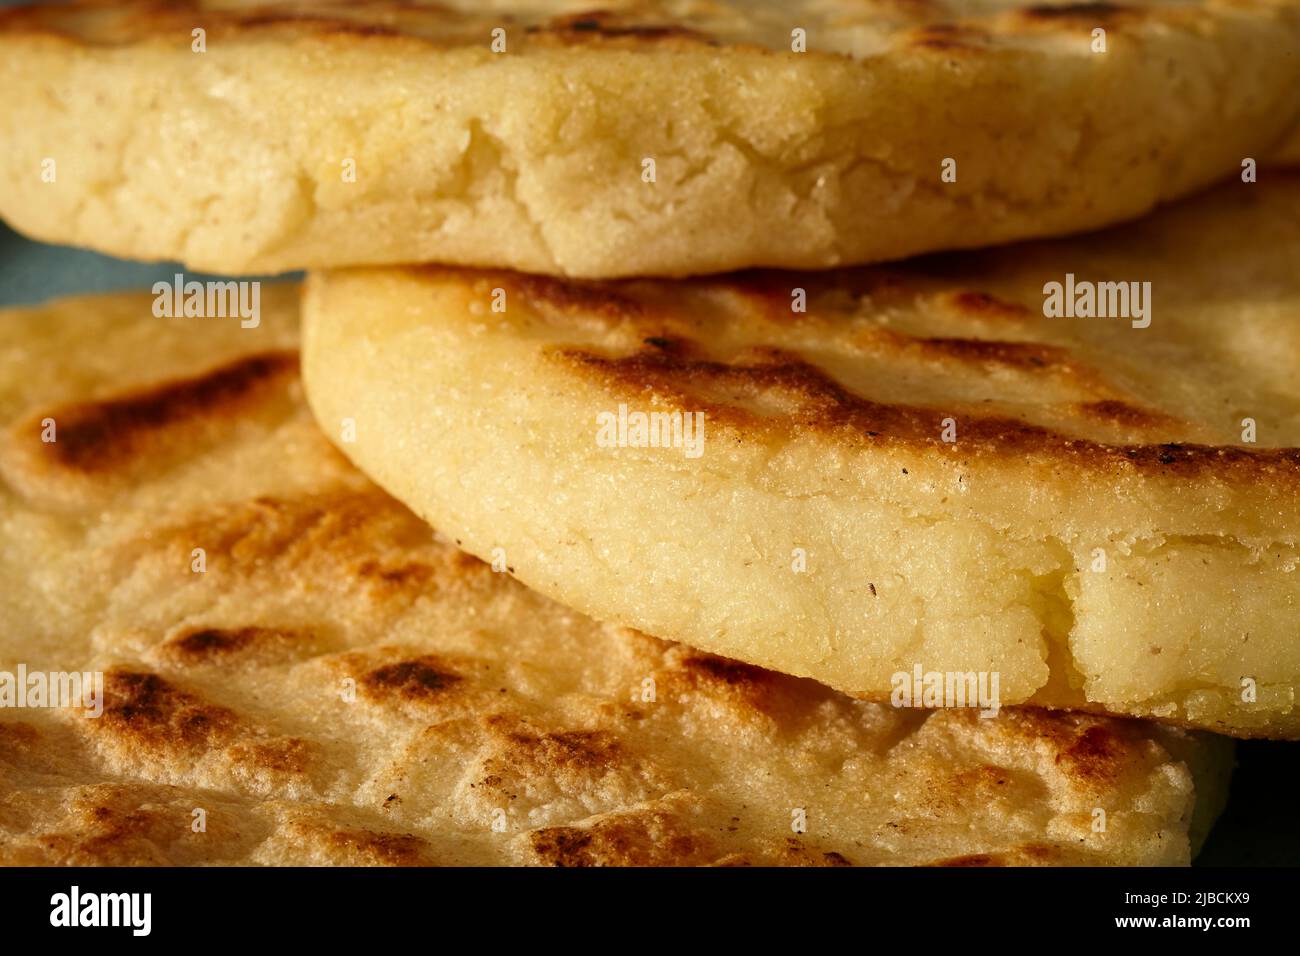 Grilled Arepas, a favorite street food from Columbia, South America Stock Photo